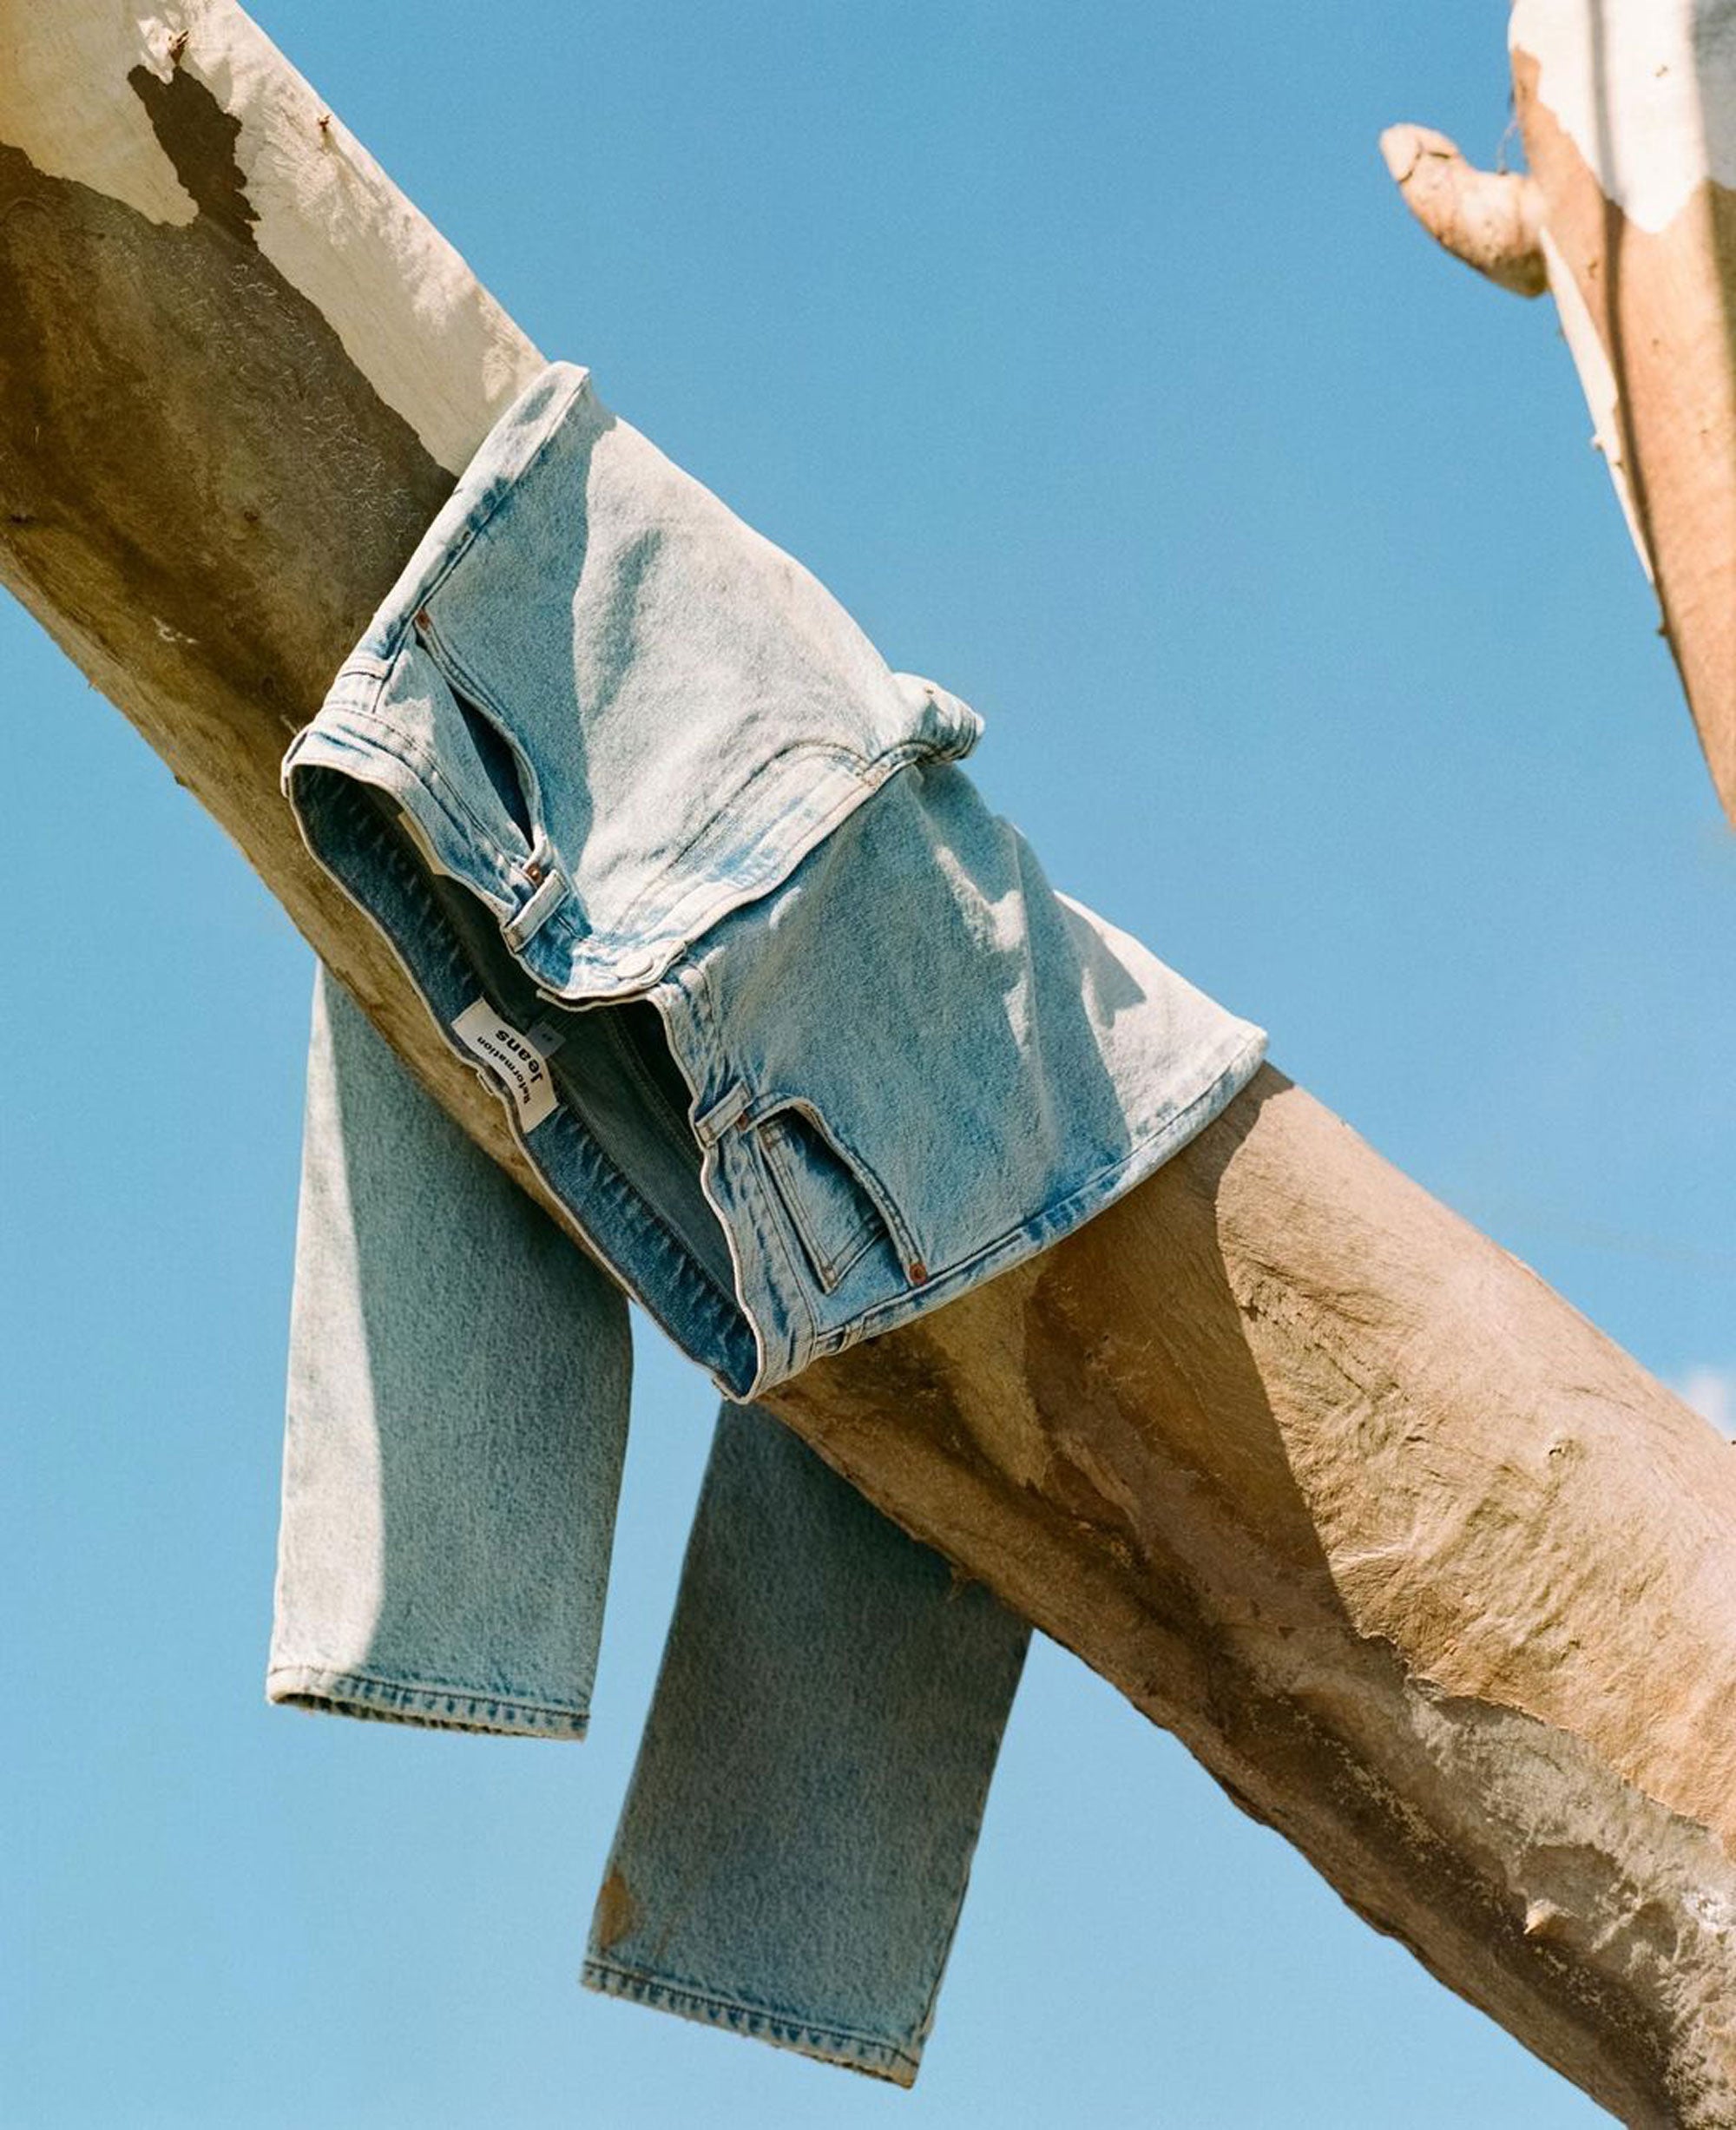 Nudie Jeans provides update on circularity project